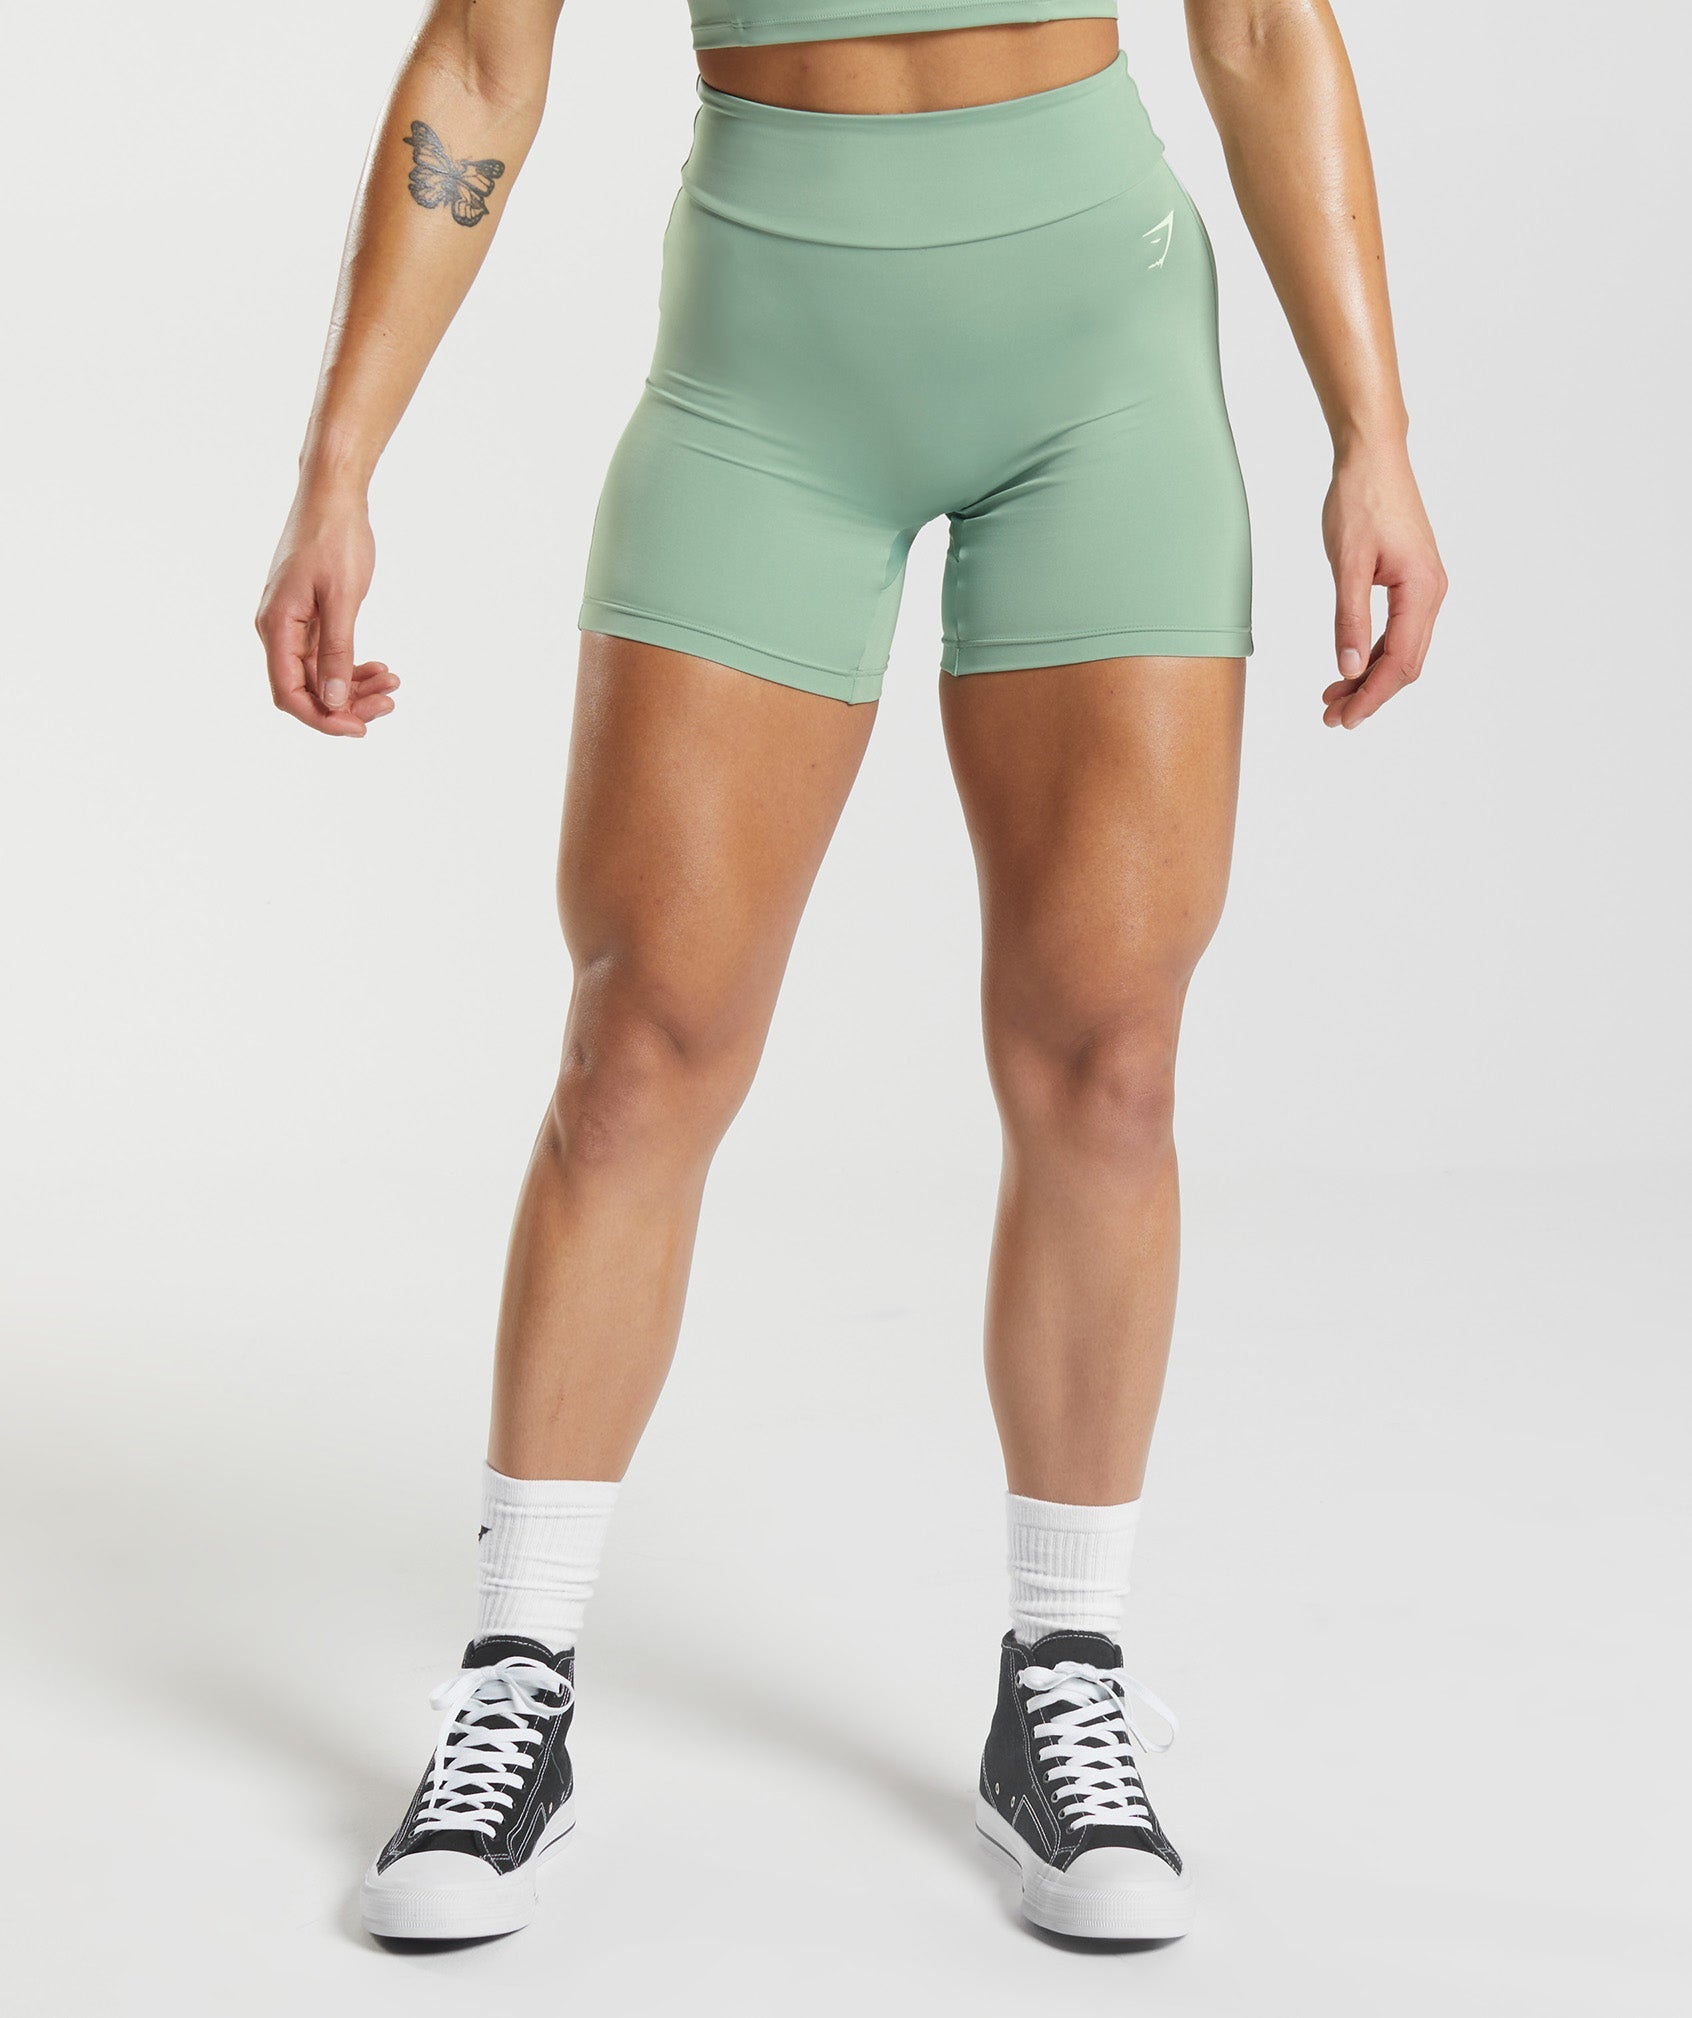 Gymshark Training Loose Fit Shorts - Green  Gym clothes women, Workout  shorts, High waist fashion